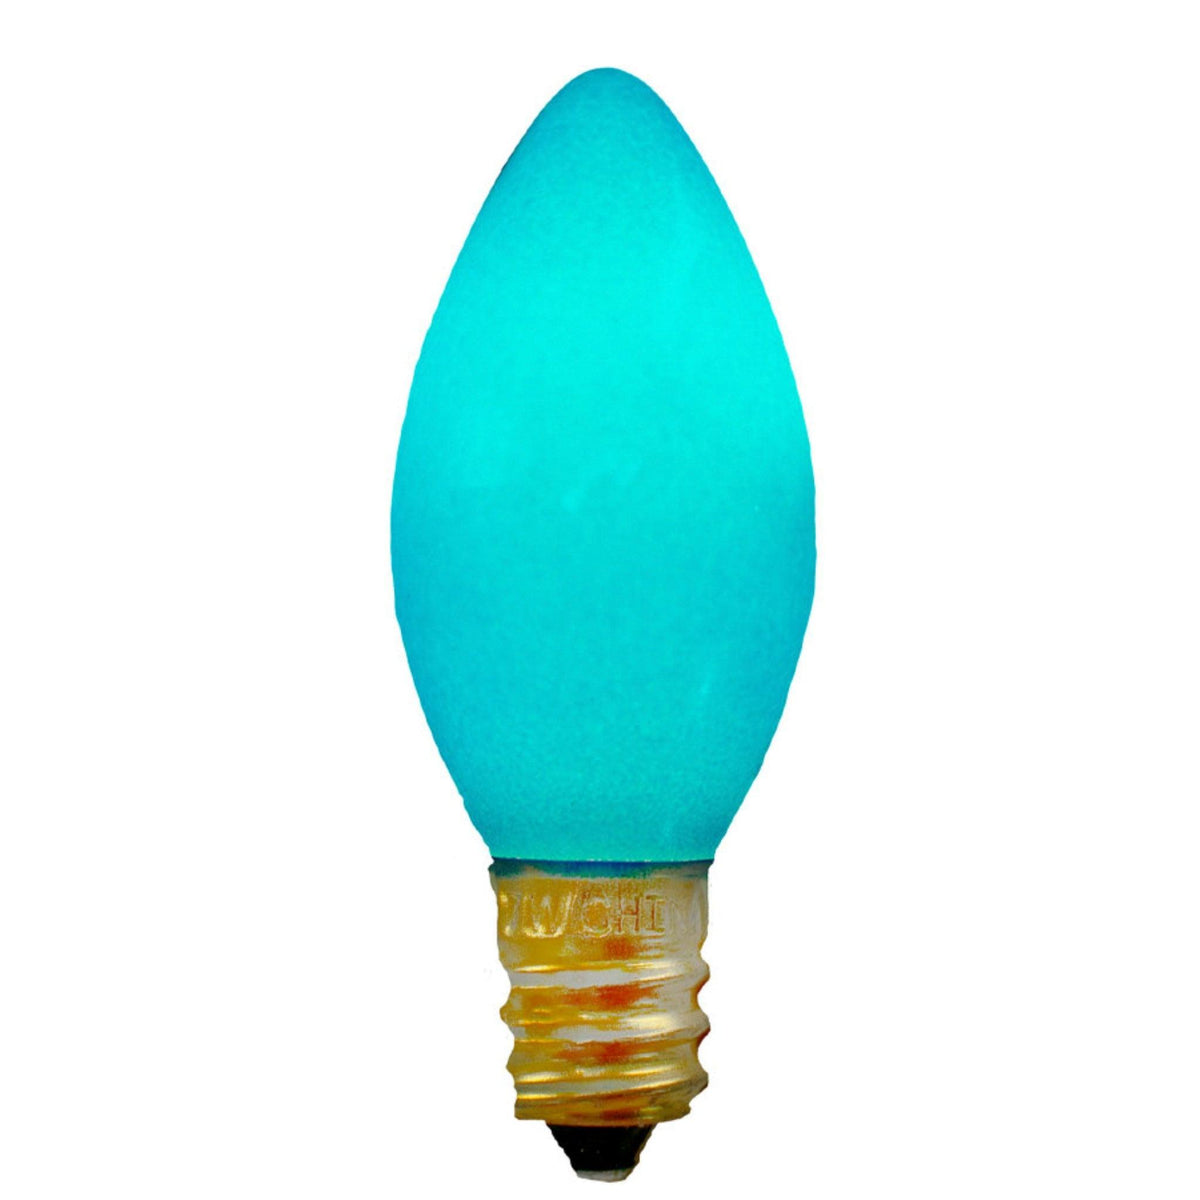 C-7 & C-9 Solid Ceramic Blue Christmas Light Bulbs.  Replace your old bulbs with a set of brand new Candelabra Lights.   Shop now at leedisplay.com